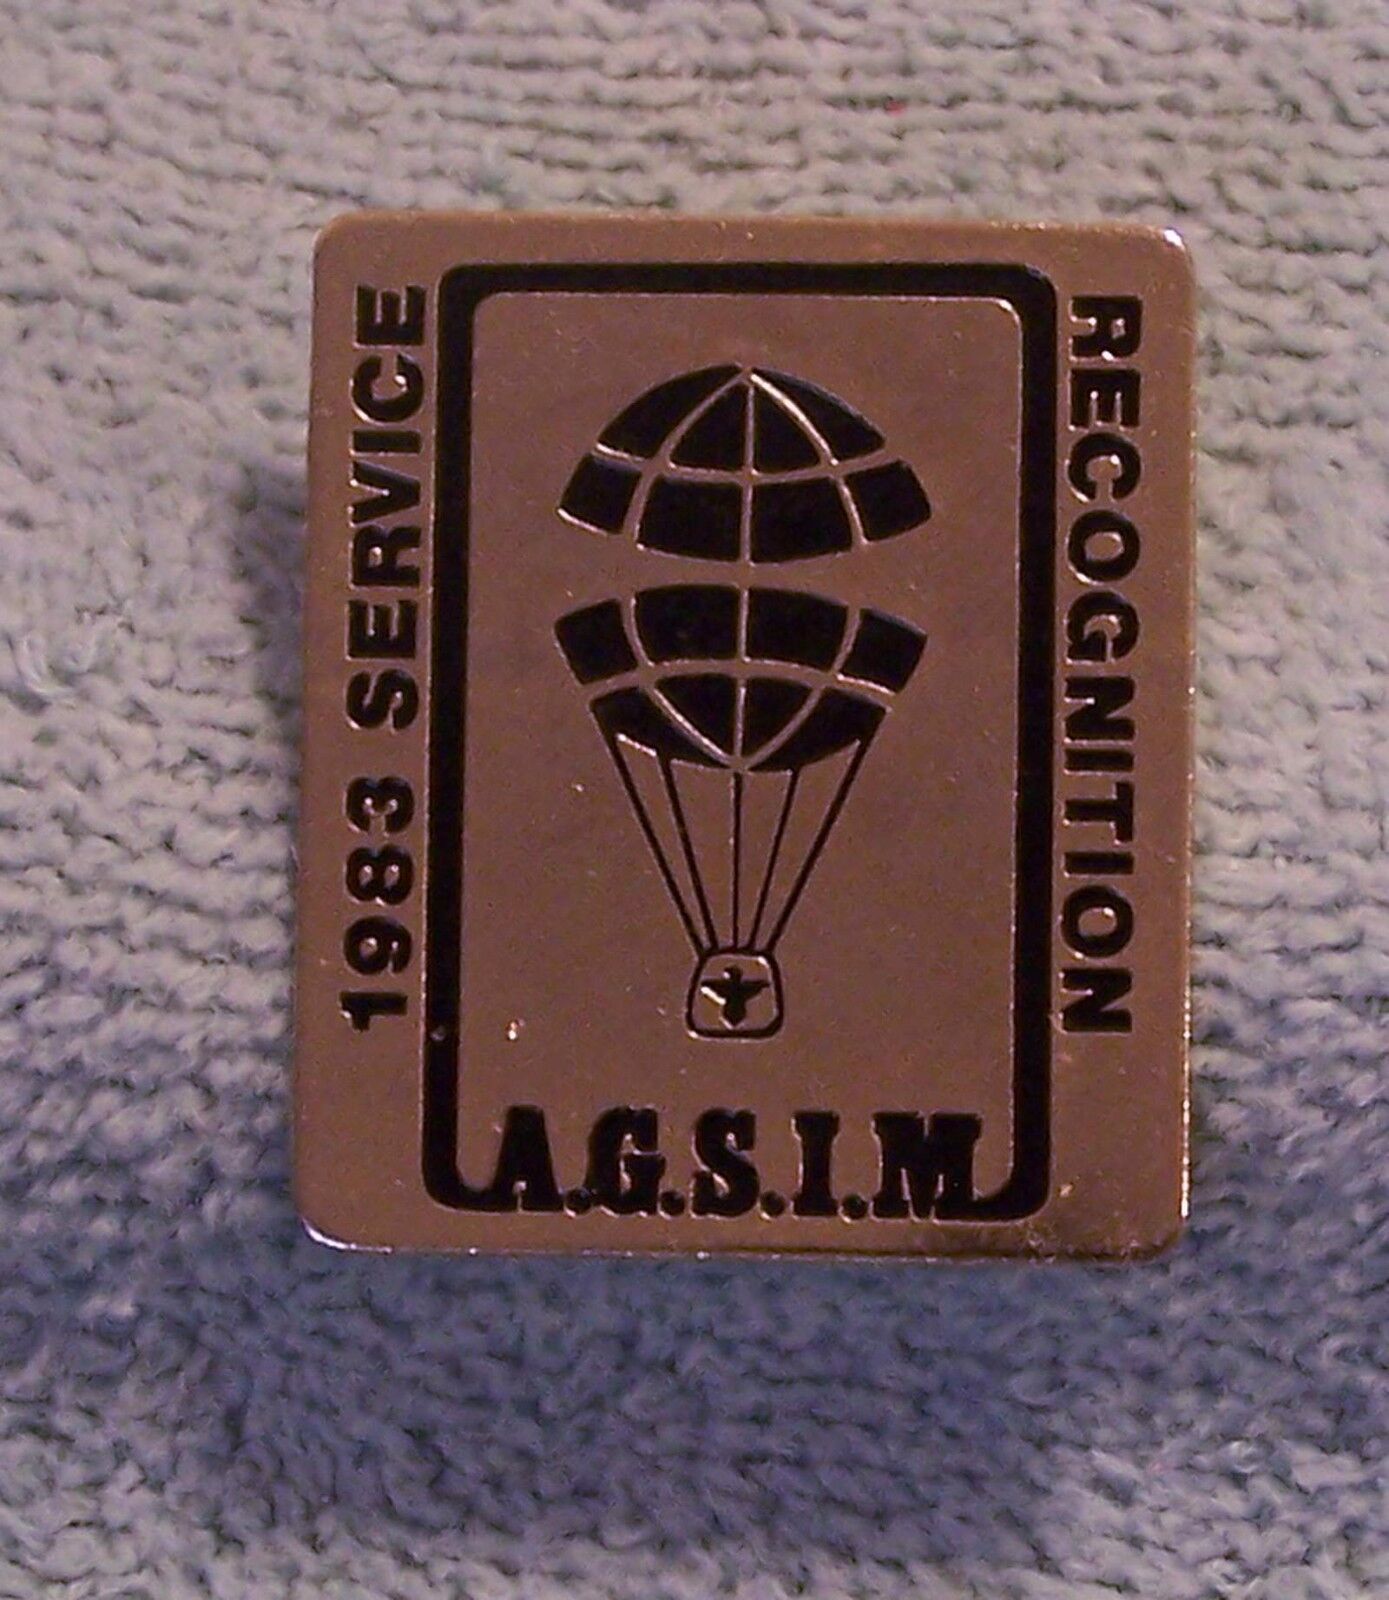 1983 SERVICE RECOGNITION A.G.S.I.M. BALLOON PIN